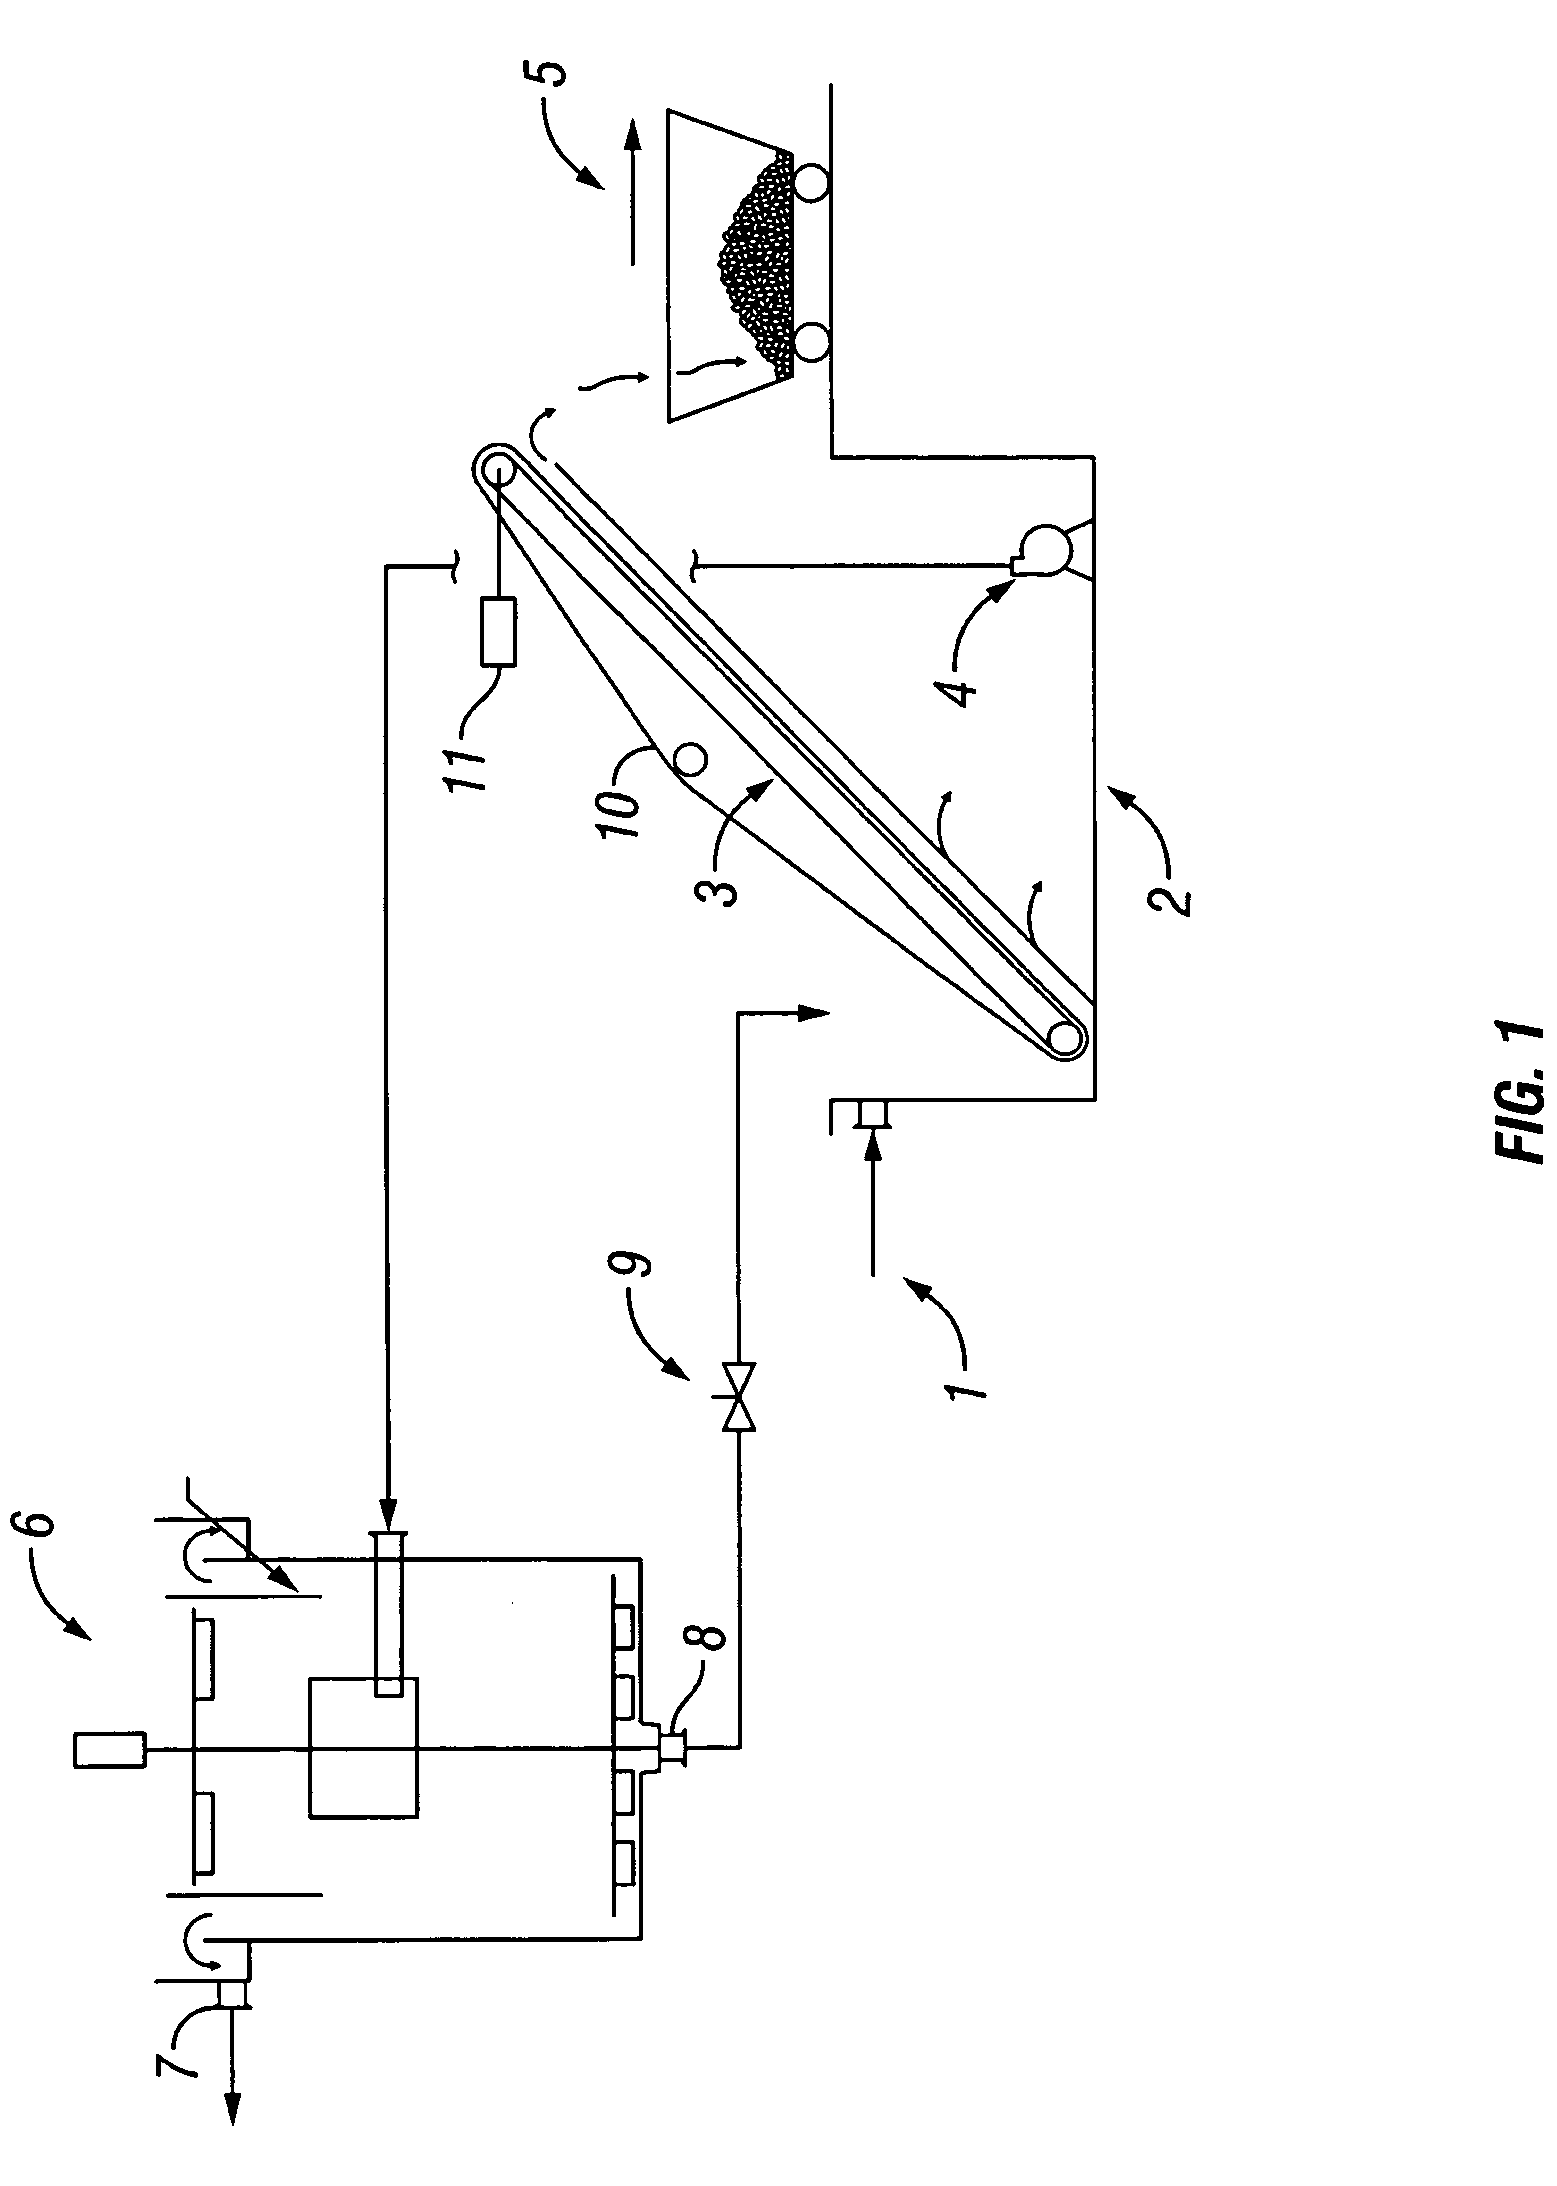 Method and apparatus for treating animal waste and wastewater